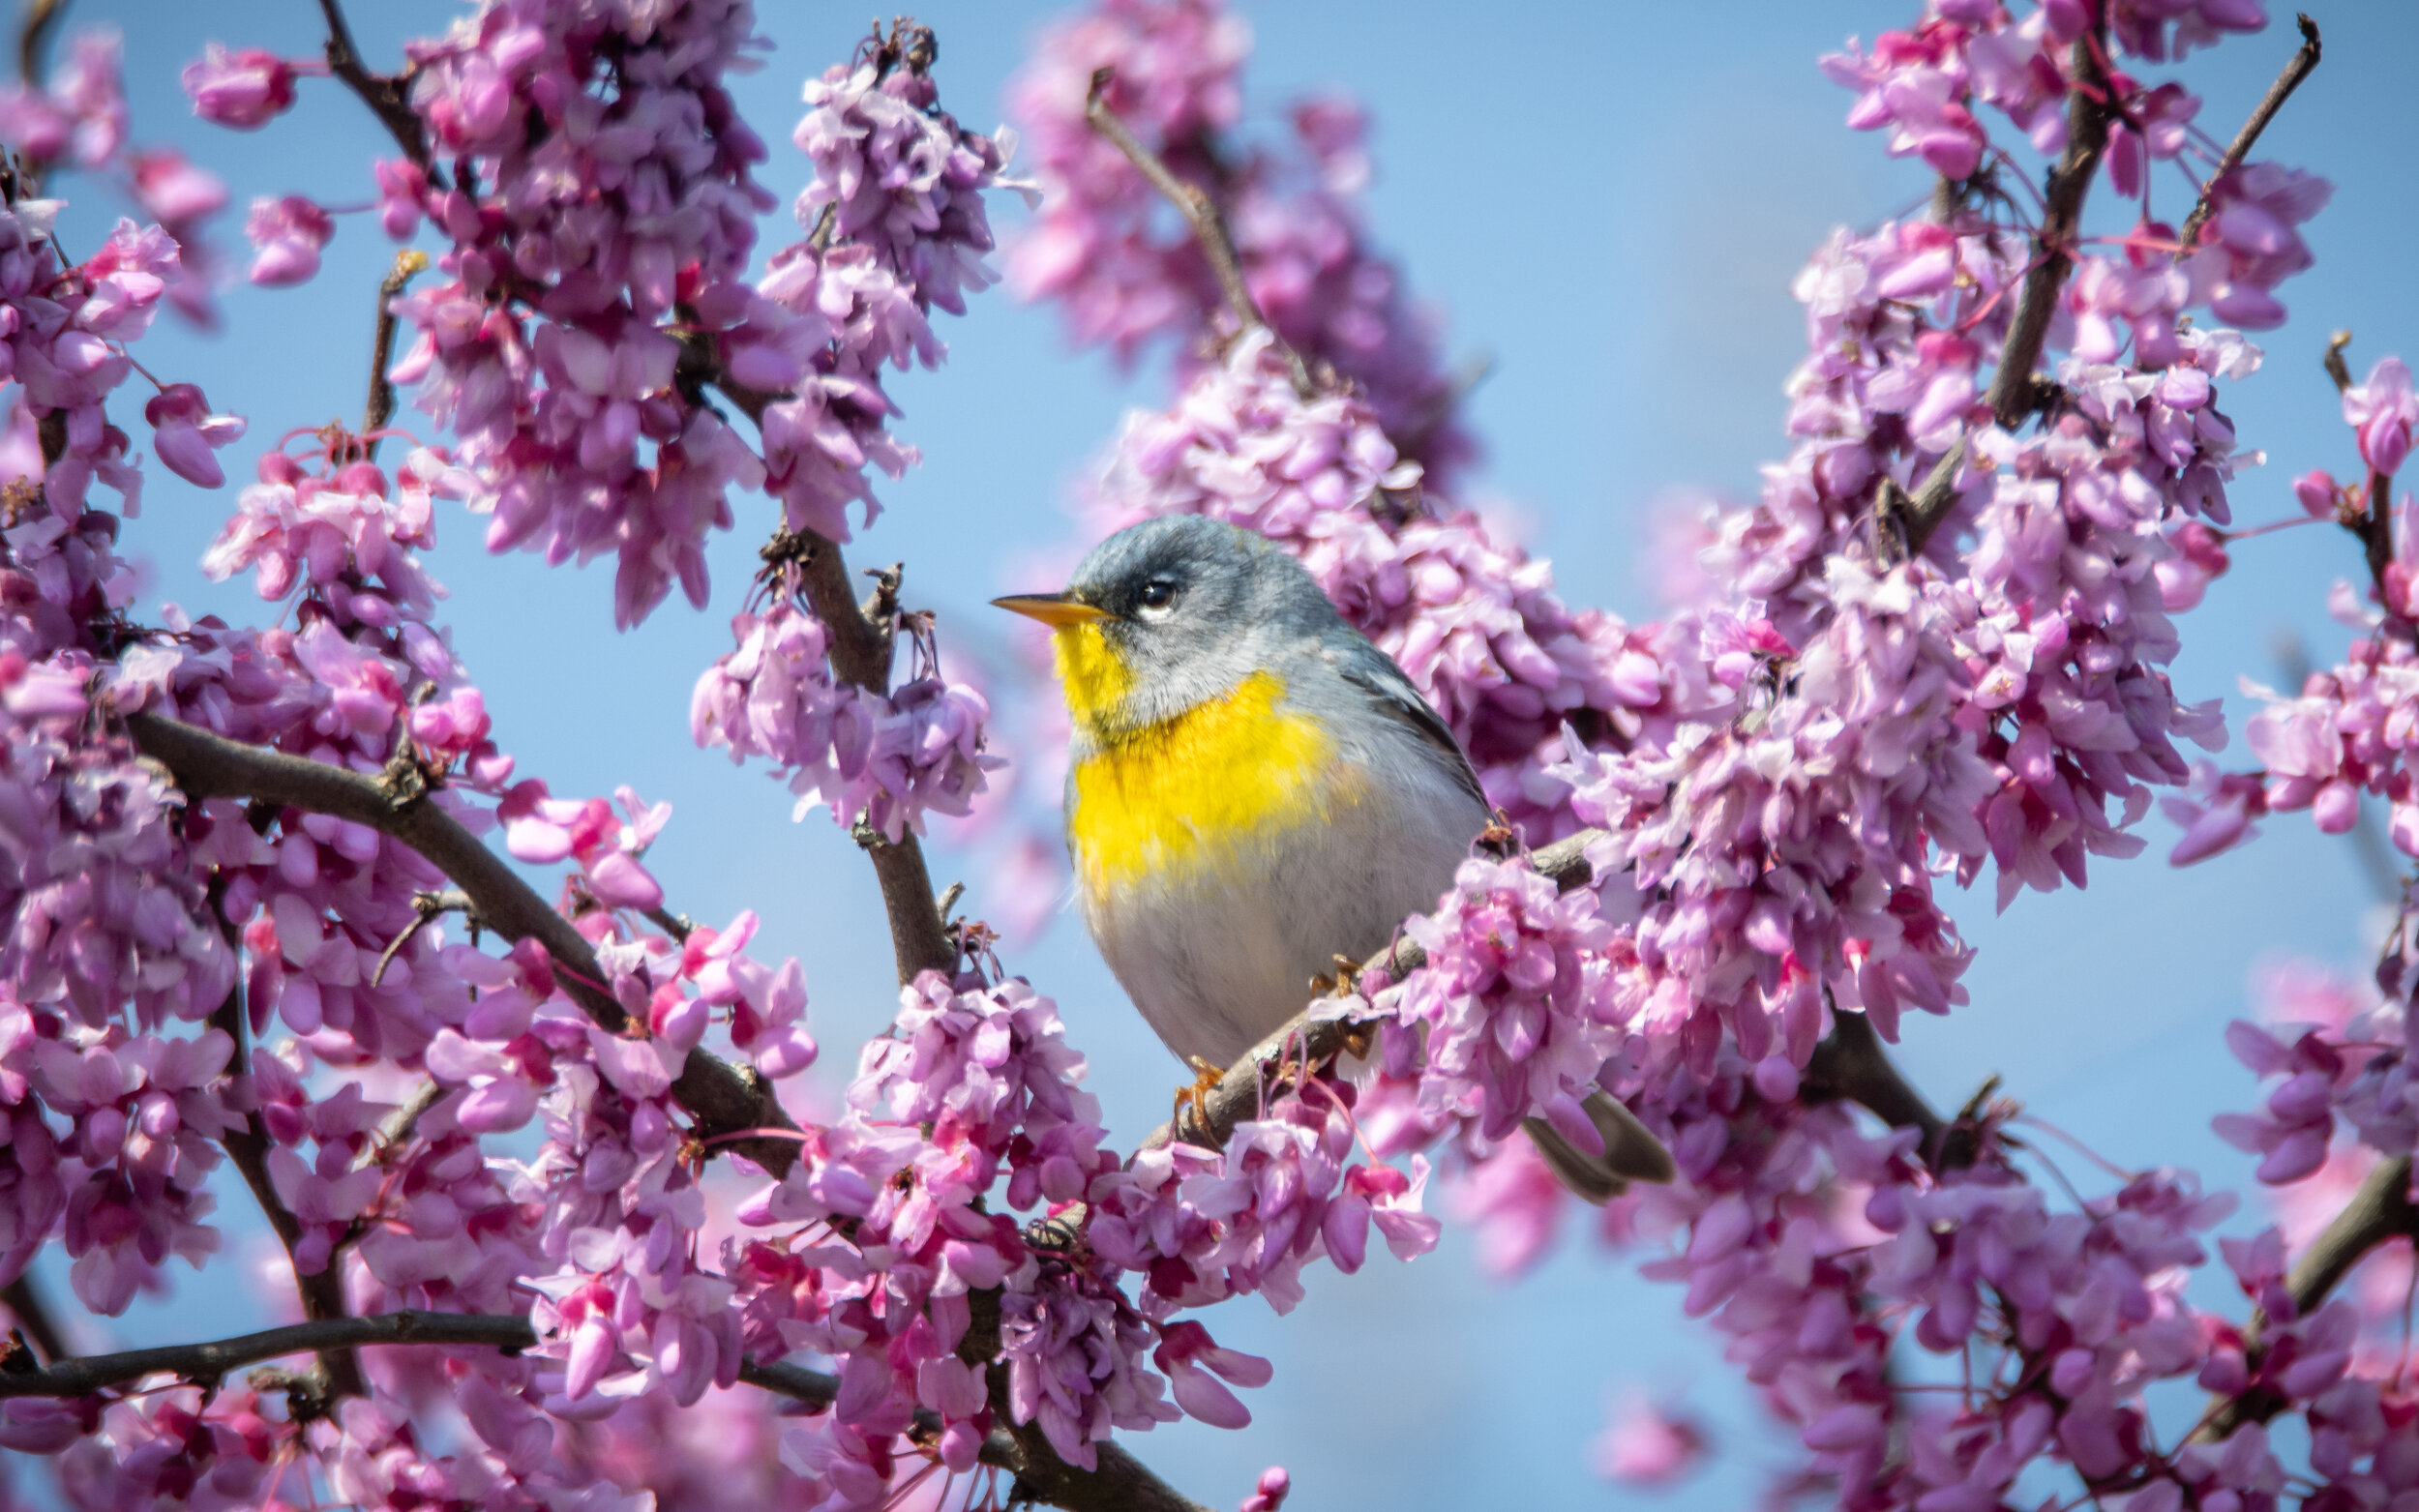 Northern Parula in Redbud Blossoms